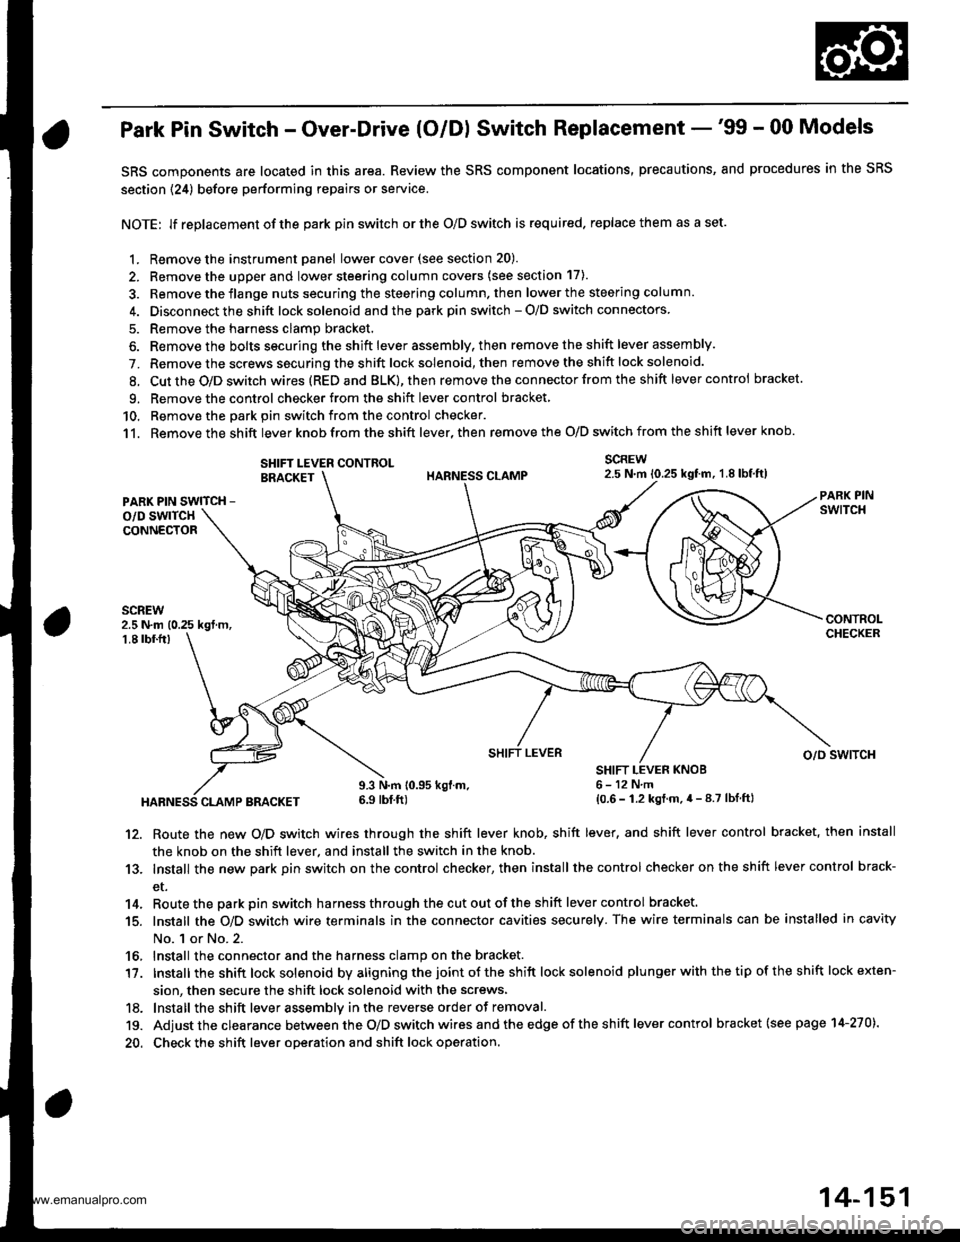 HONDA CR-V 1999 RD1-RD3 / 1.G Workshop Manual 
Park Pin Switch - Over-Drive (O/Dl Switch Replacement -99 - 00 Models
SRS components are located in this area. Review the SRS component locations, precautions, and procedures in the SRS
section {24)